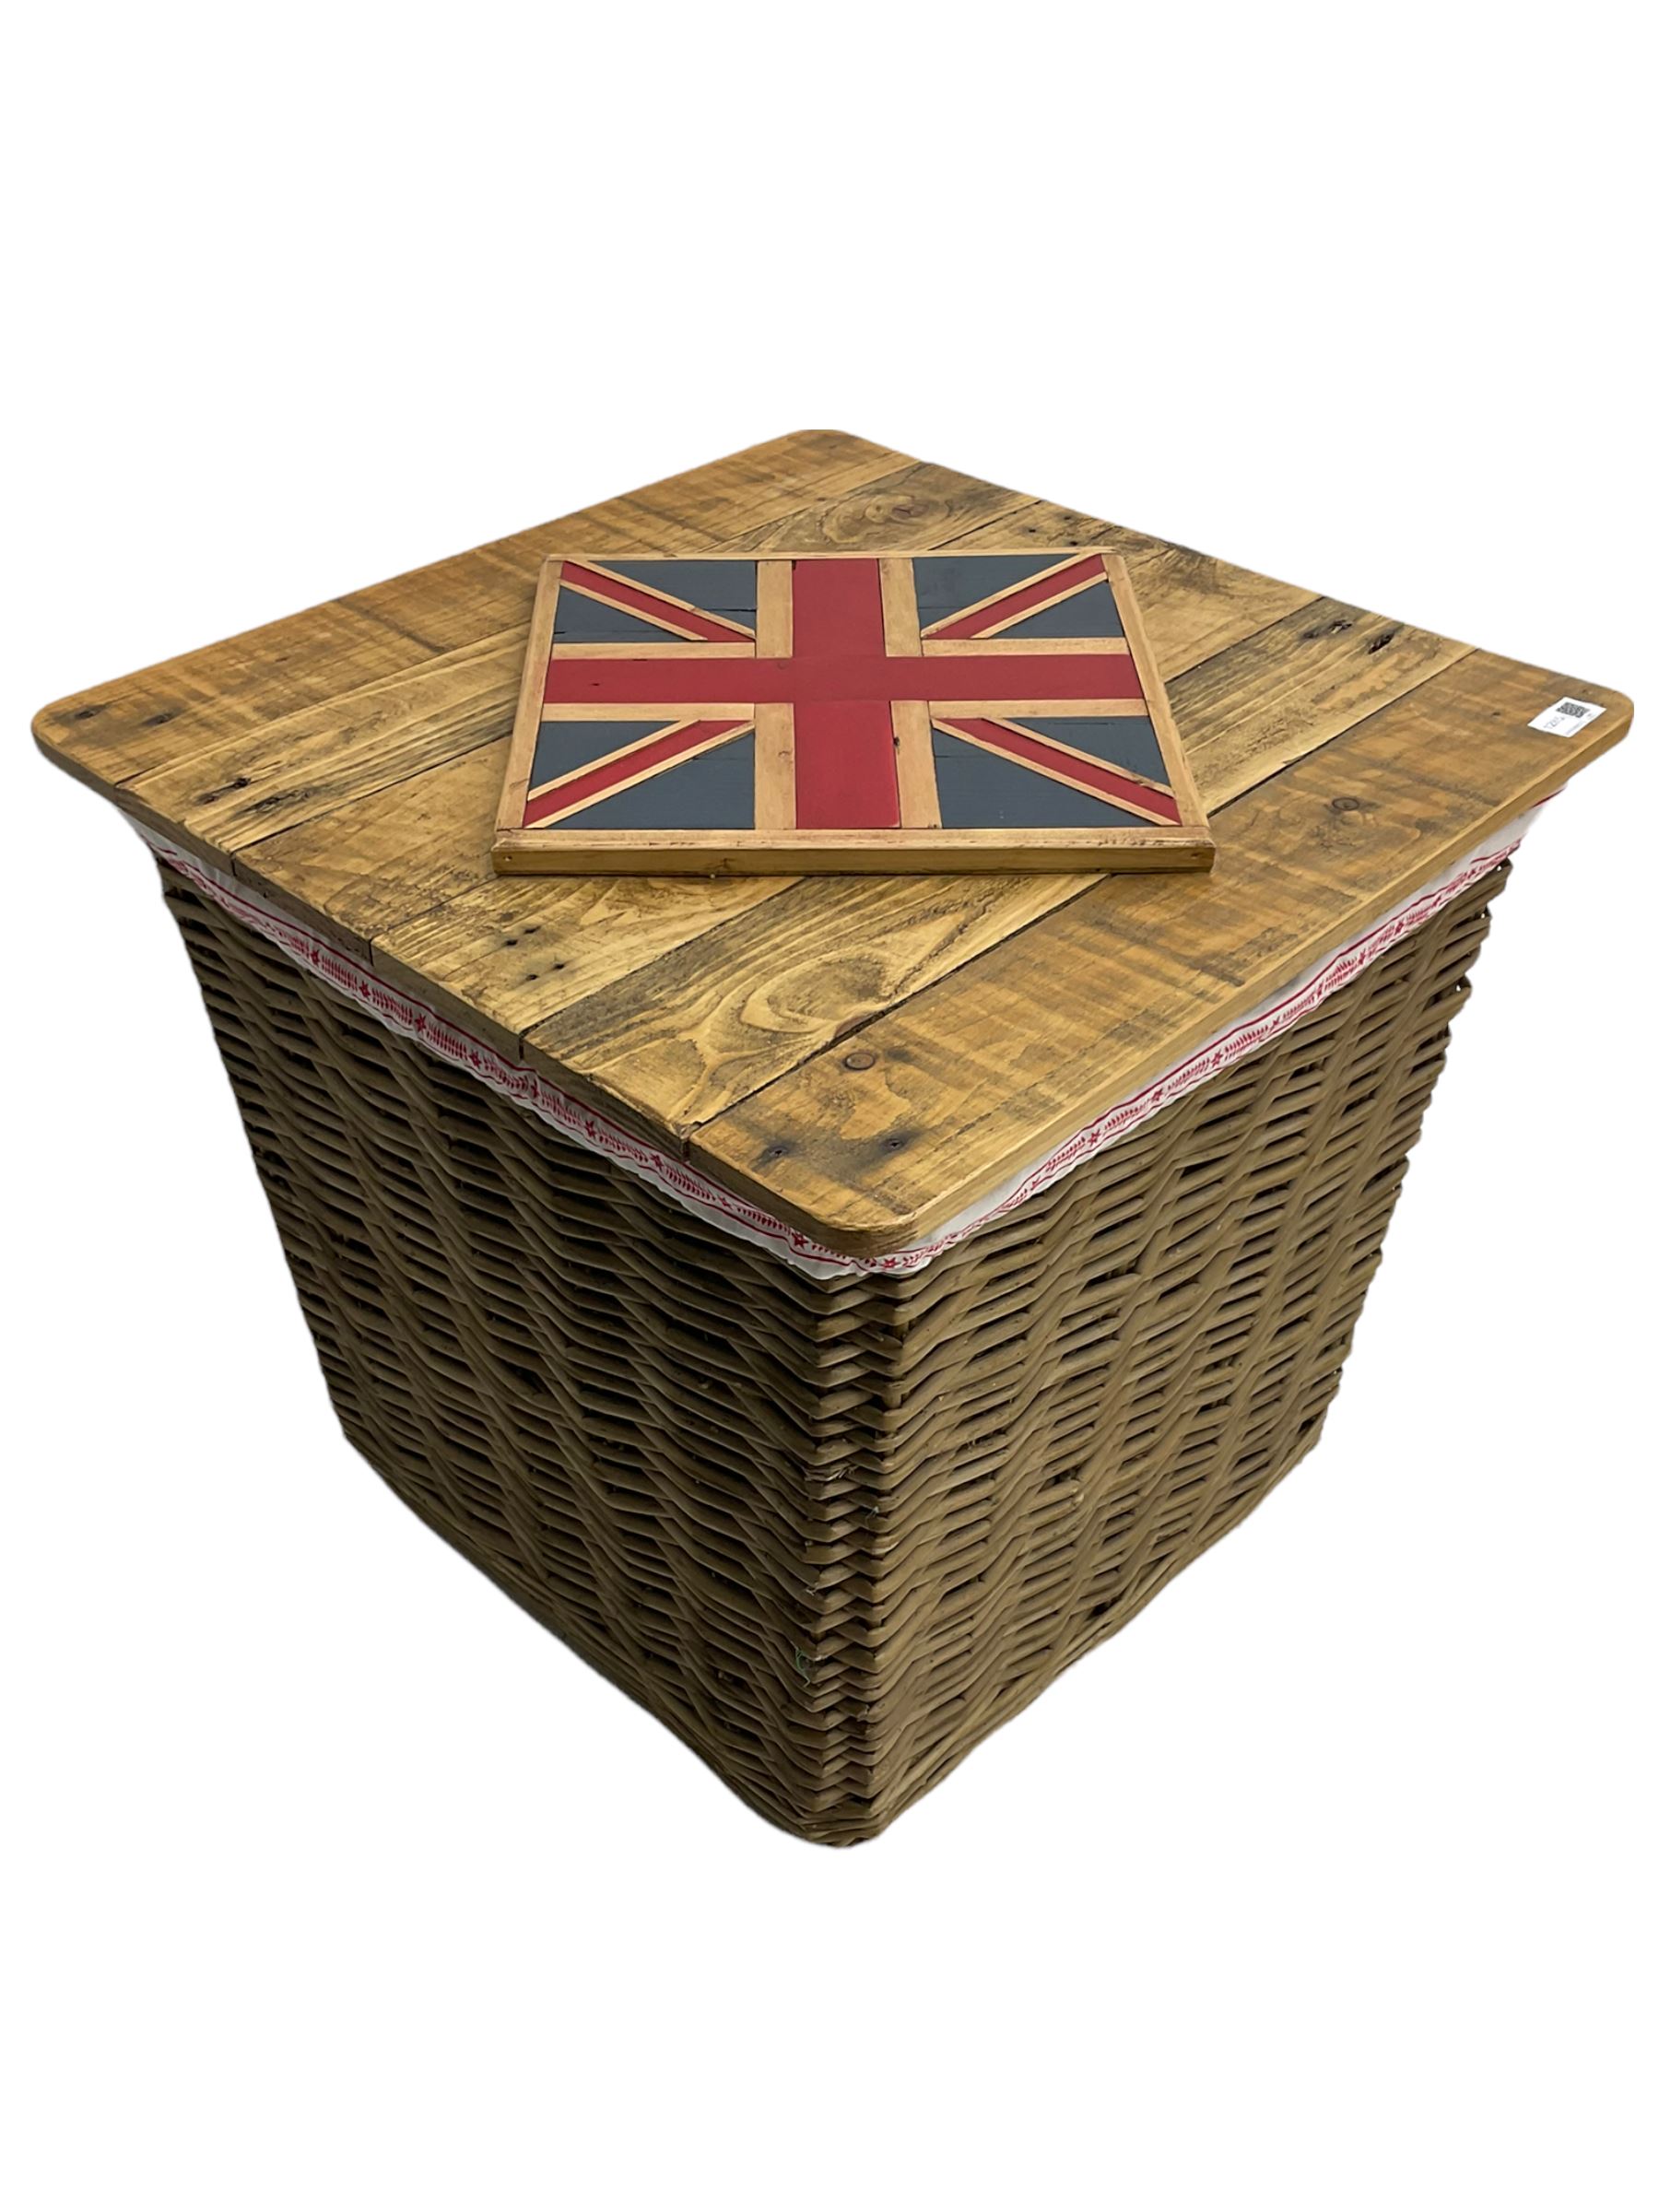 Wicker linen basket with plank Union Jack top - Image 2 of 5